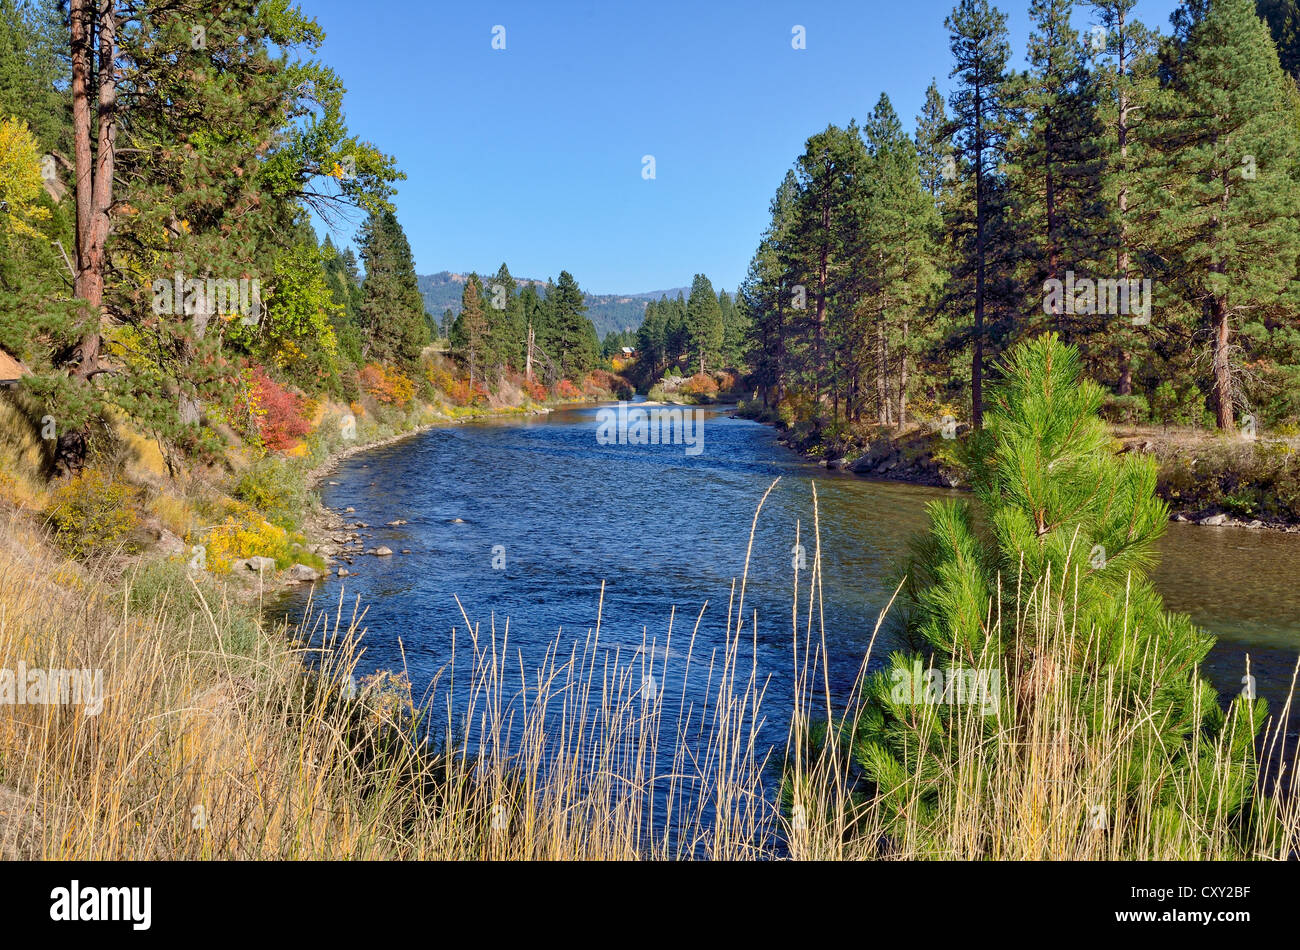 South Fork Payette River Scenic Byway Wildlife Garden Valley, Highway 24, Idaho, USA Stockfoto